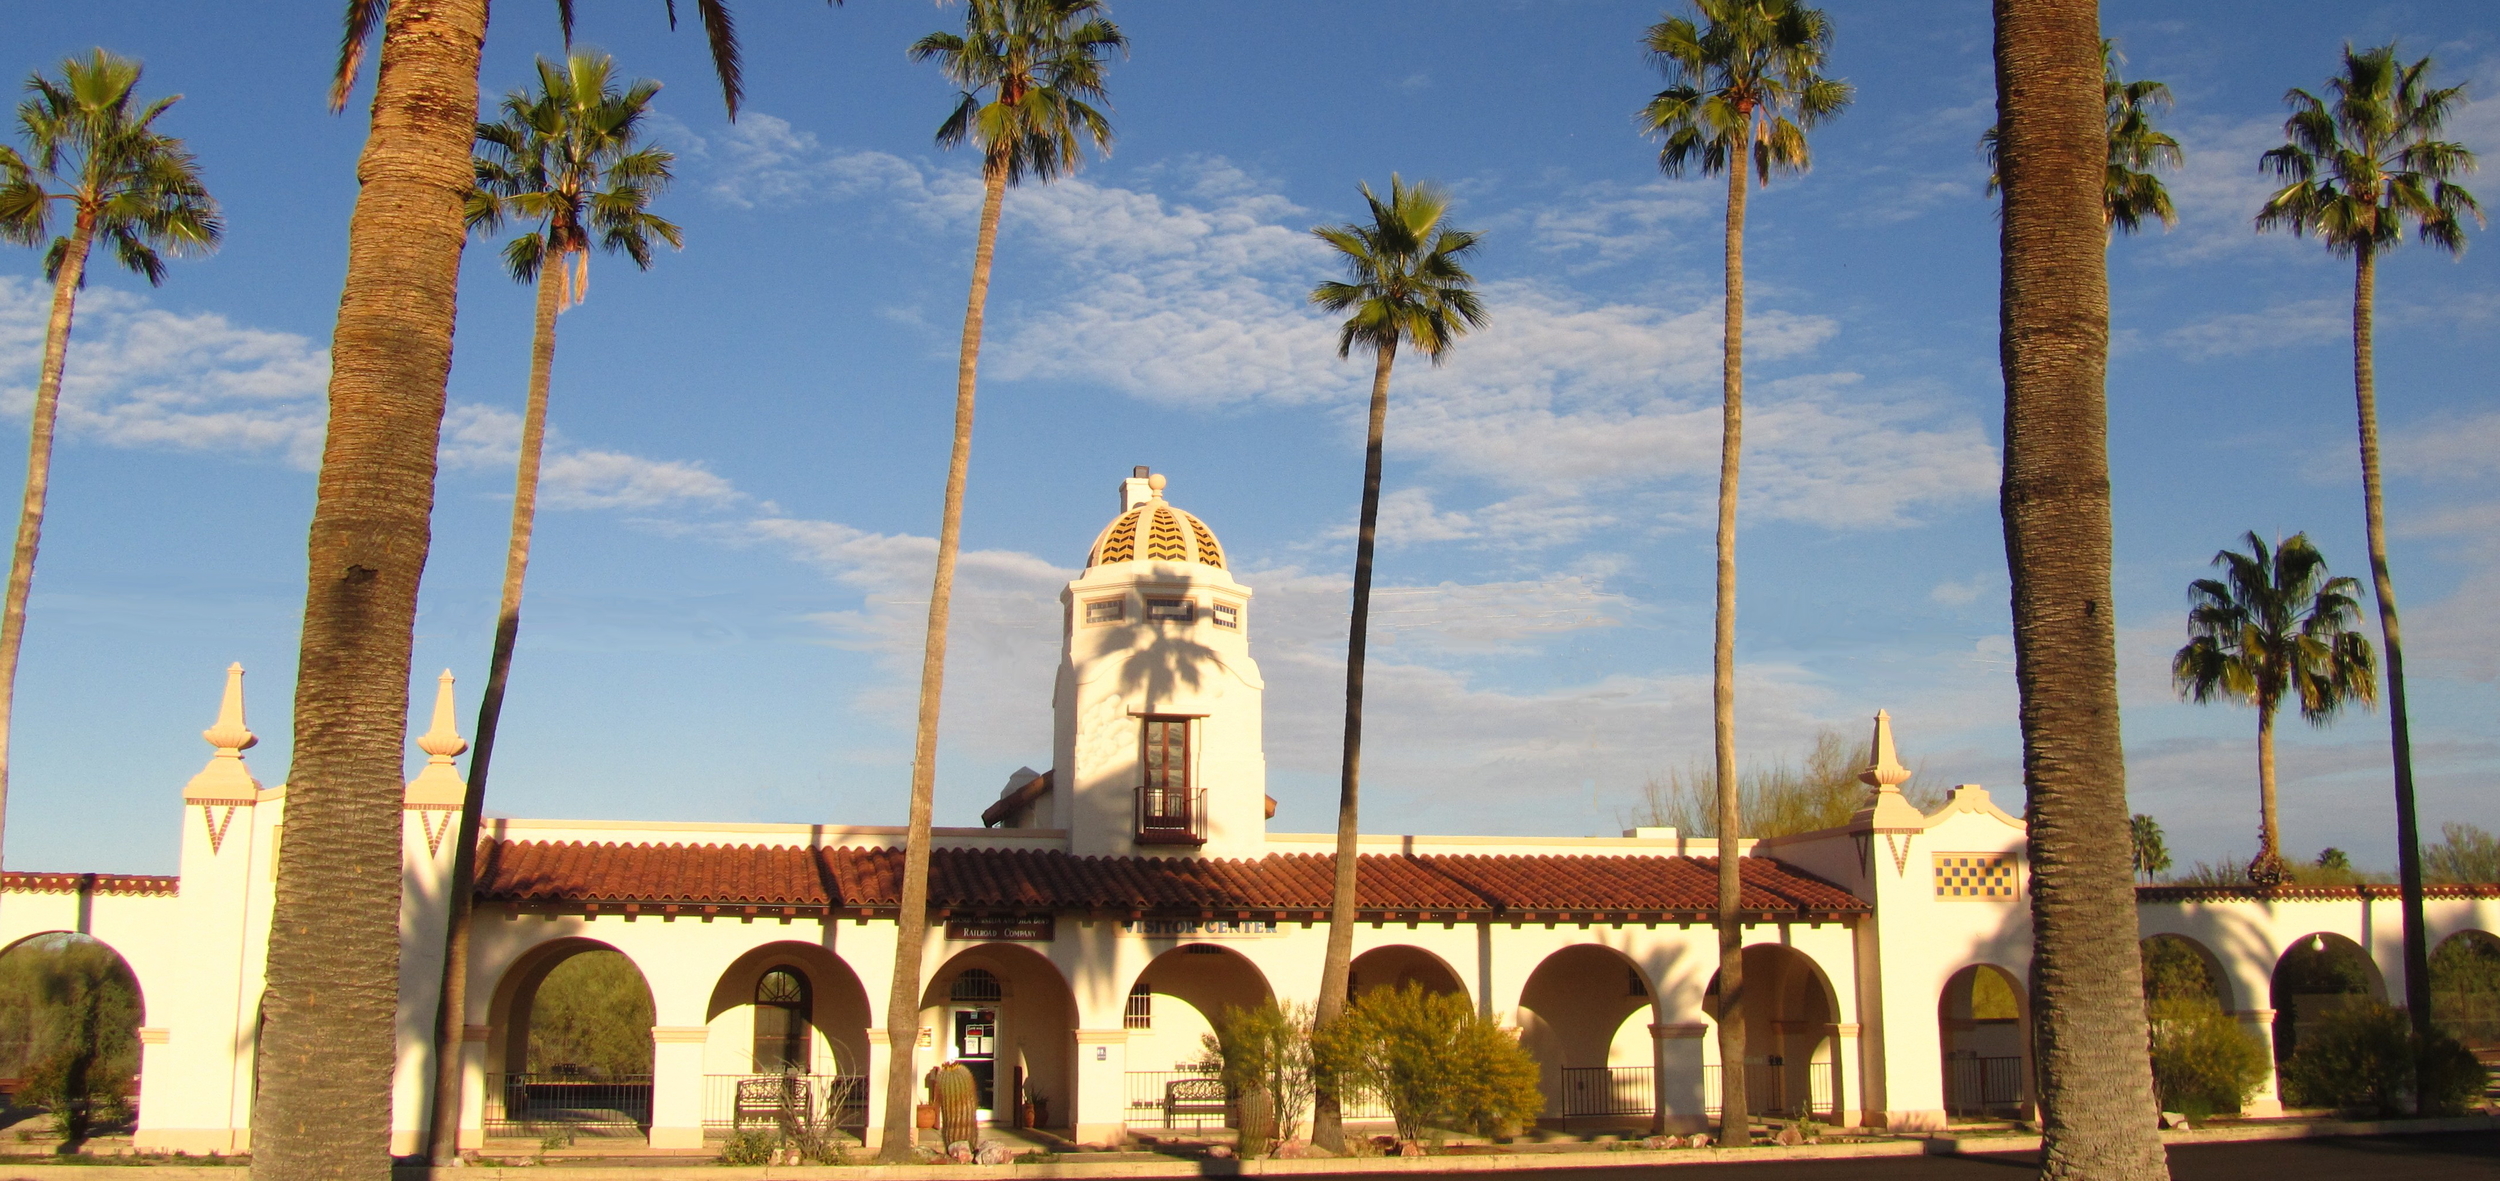 The former train depot, now the Visitor Center